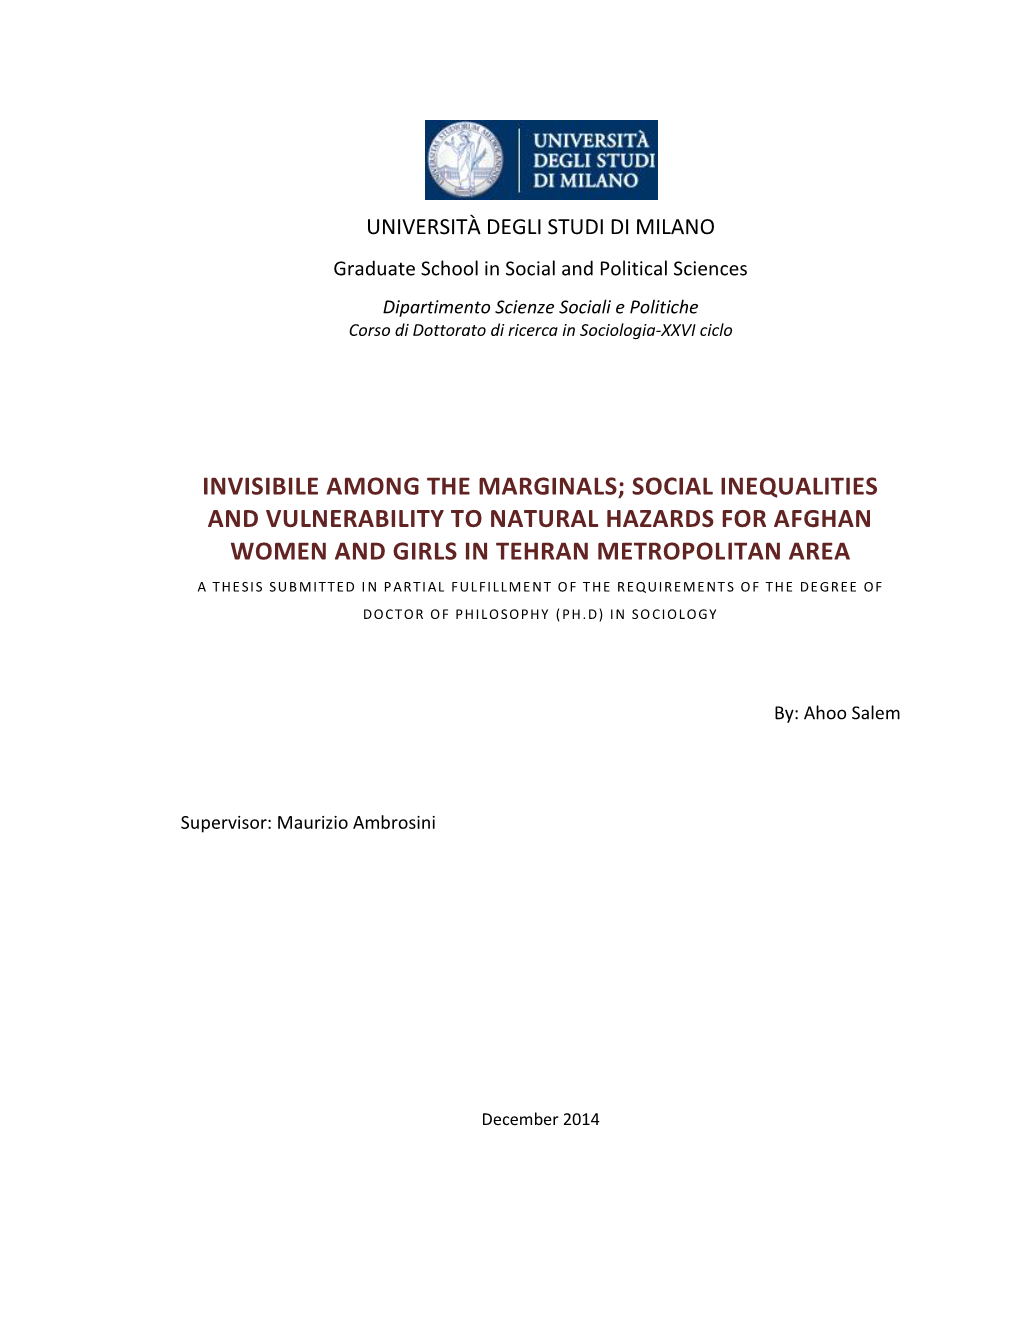 Social Inequalities and Vulnerability To